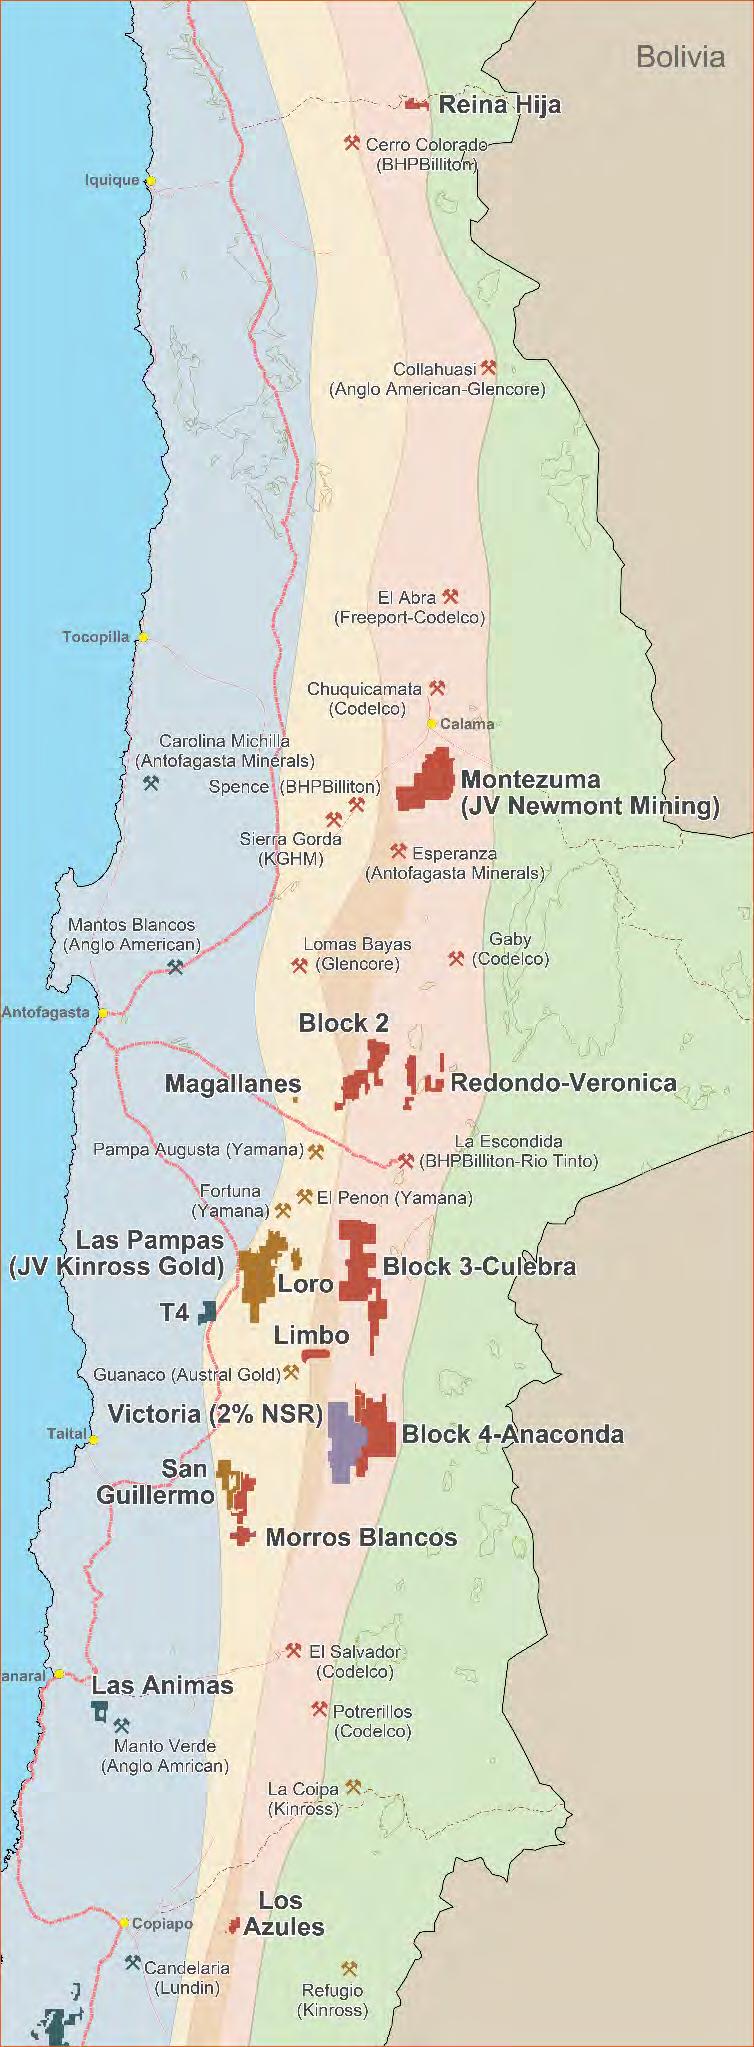 LOCATION Reina Hija is located approximately 130Km eastnortheast of the coastal city of Iquique, and along trend and approximately 120Km north-northwest of the giant porphyry copper district of